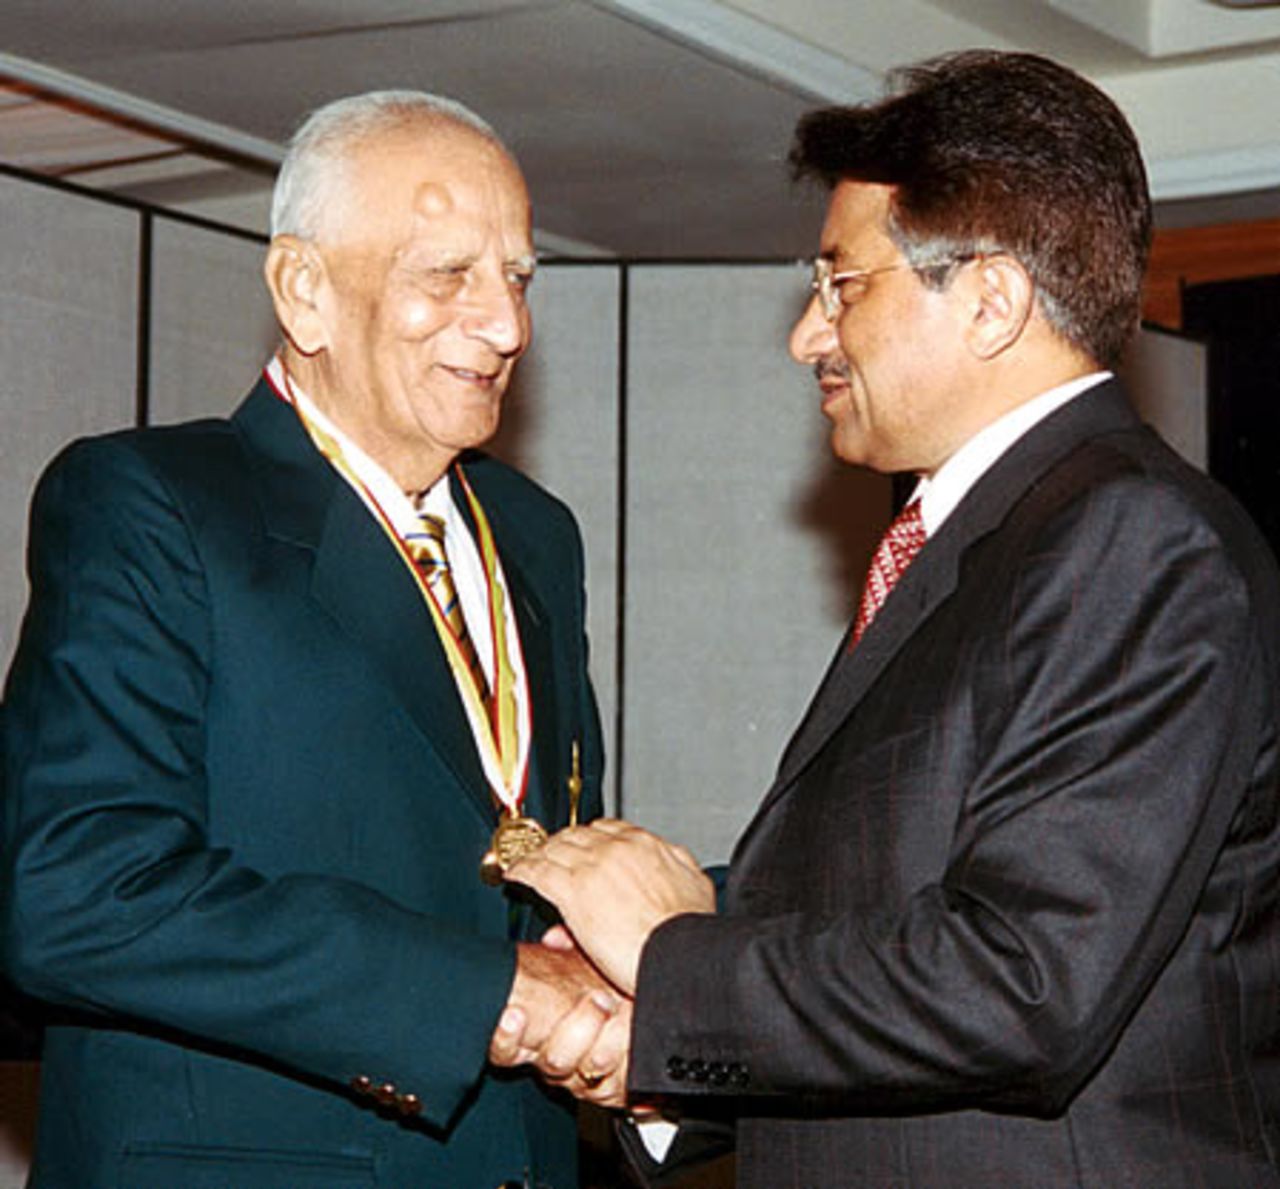 Fazal Mahmood receiving his medal from Pakistan president during the Golden Jubilee of Test Cricket Gala, Islamabad, September 16, 2003.